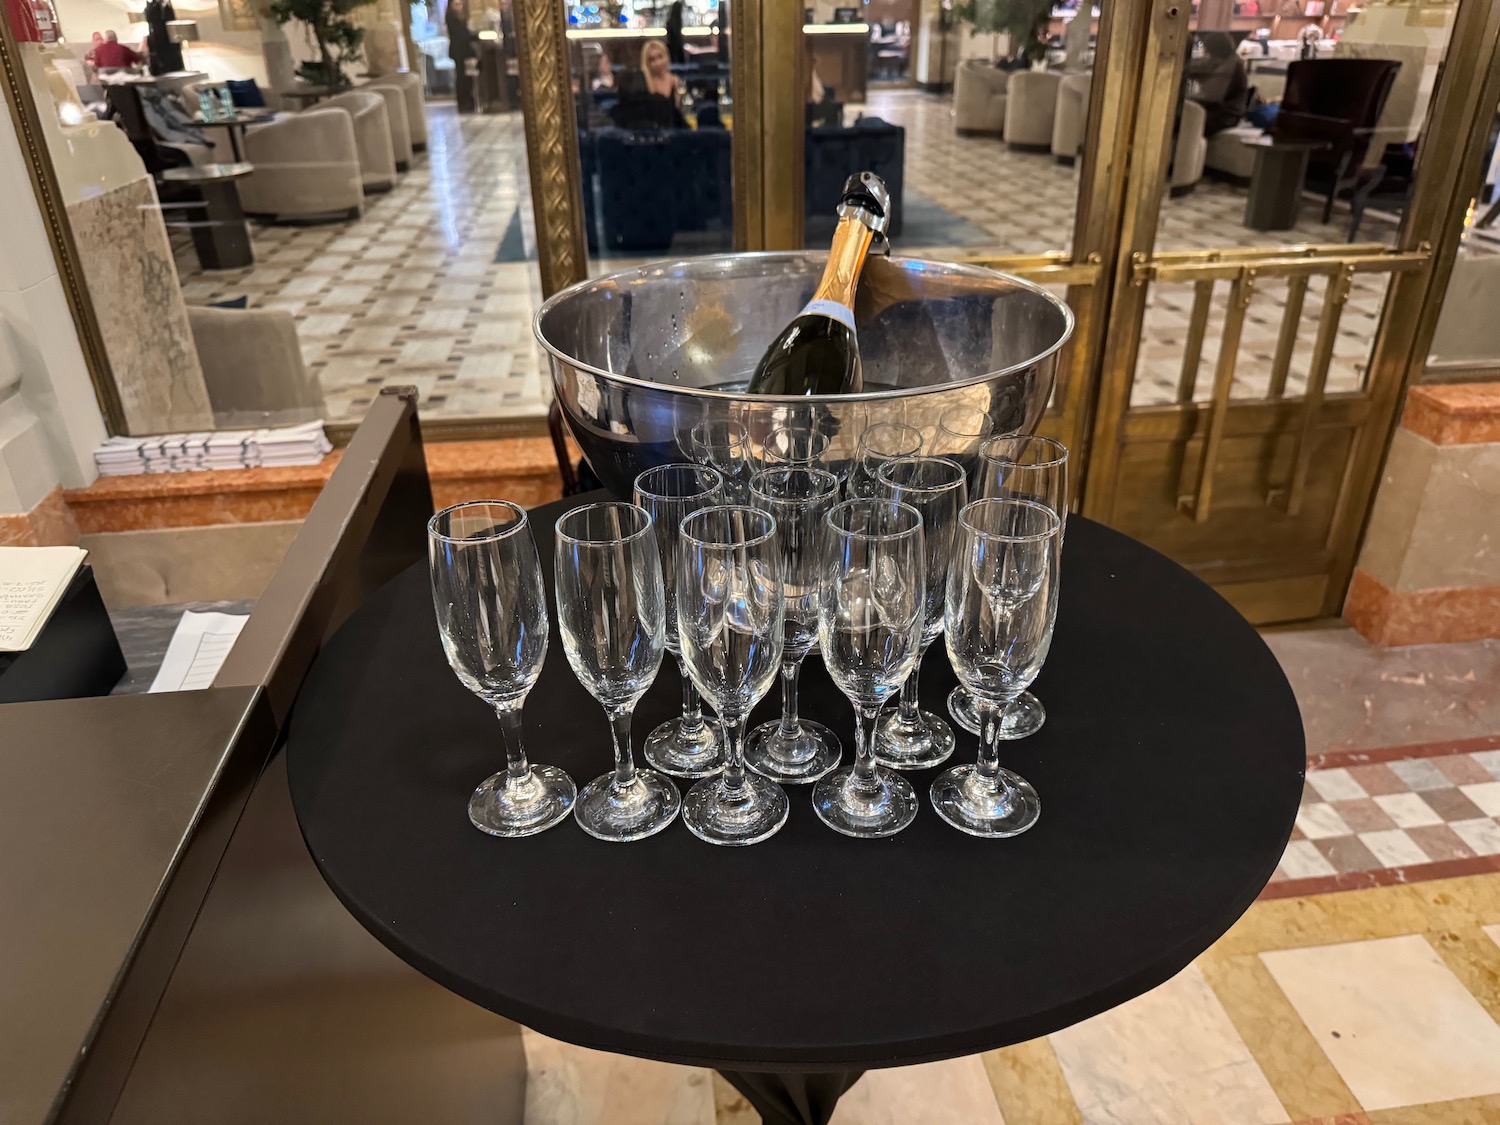 a champagne bottle in a bucket and several glasses on a table